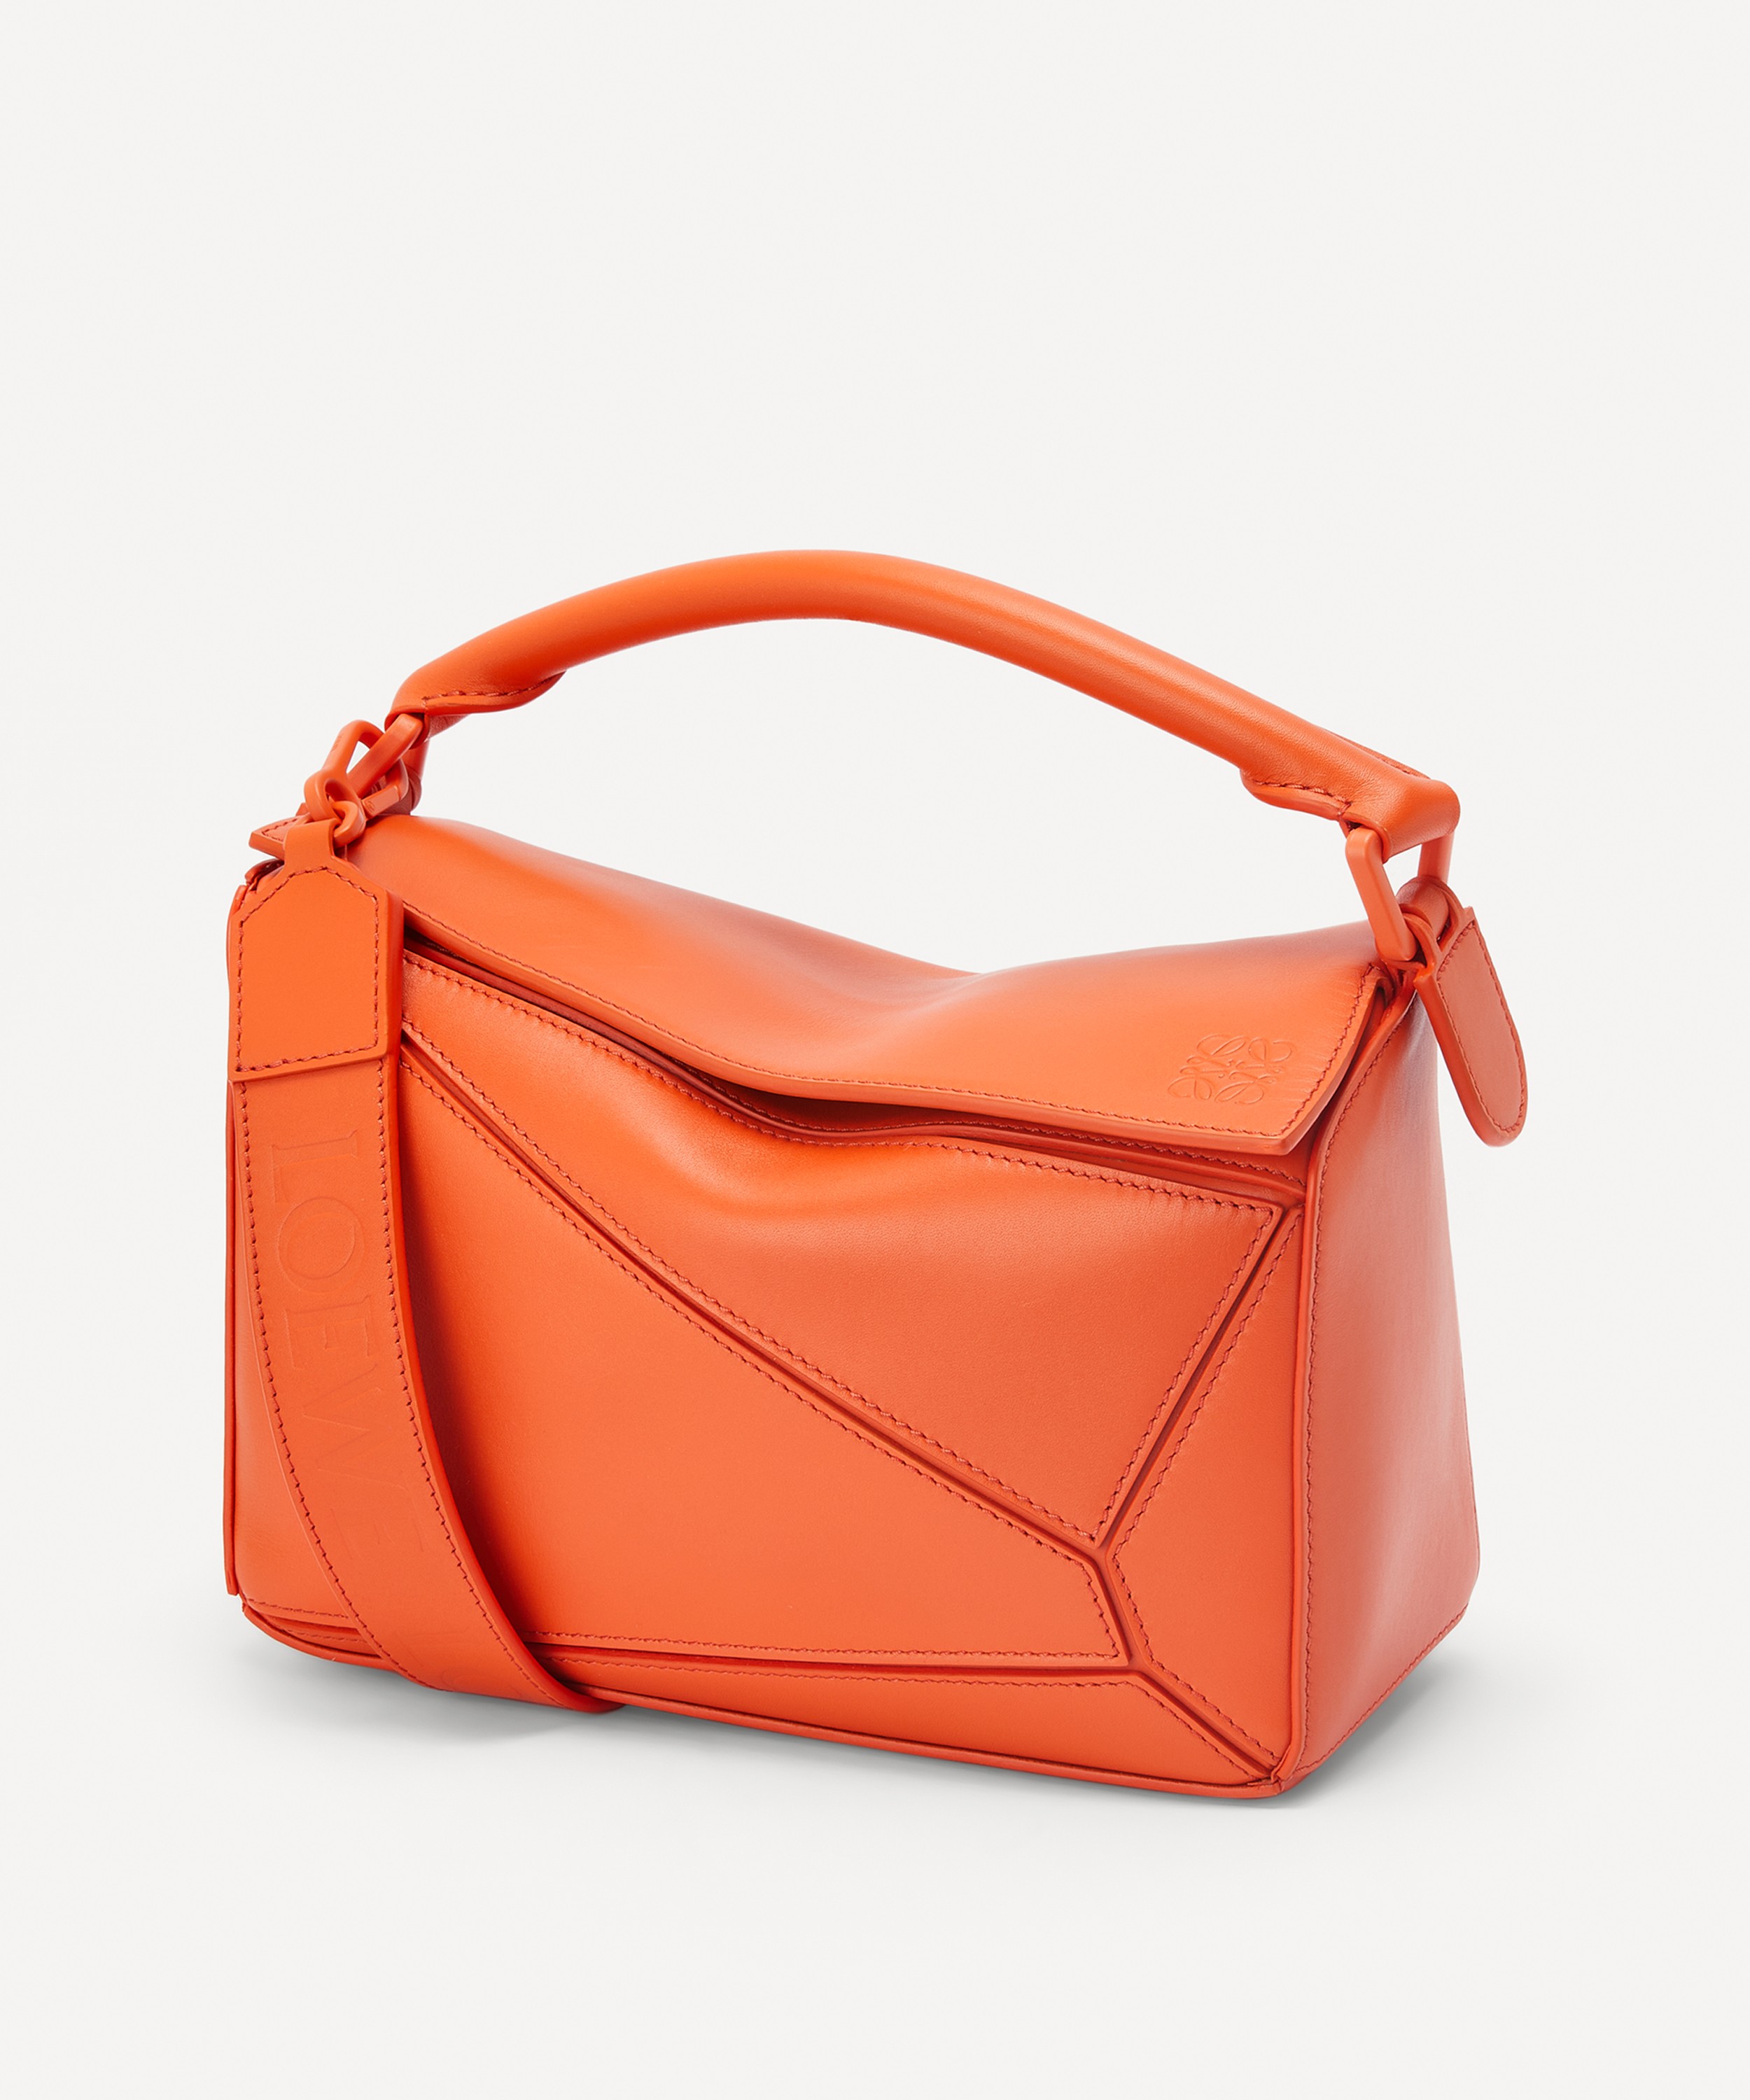 How the Loewe Puzzle Bag Became a Modern-Day Classic